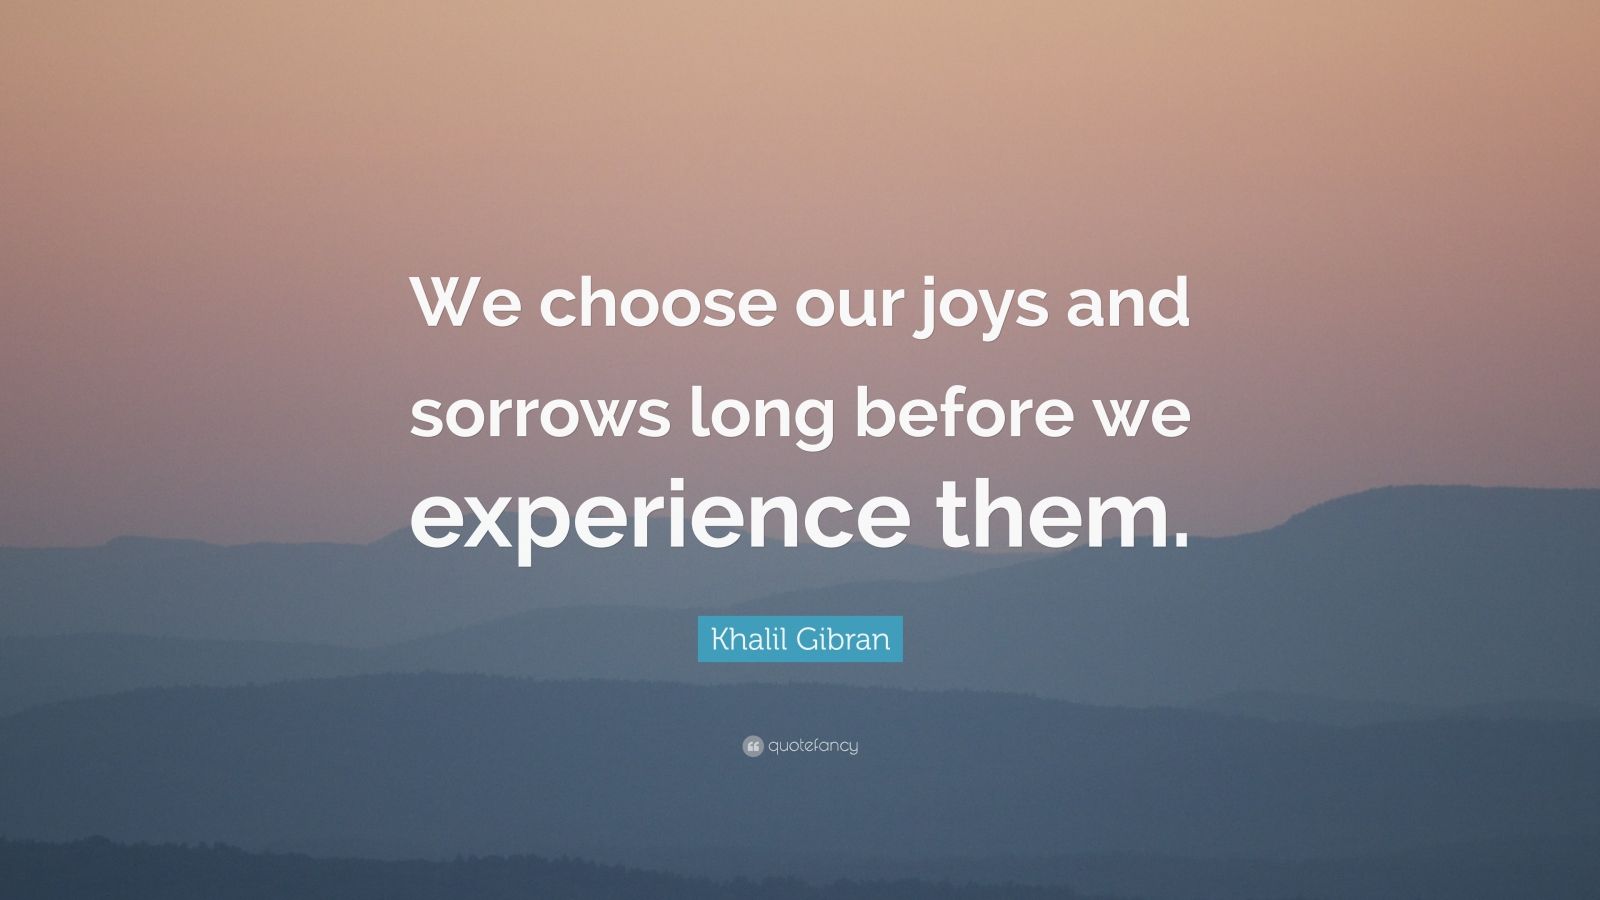 Khalil Gibran Quote: "We choose our joys and sorrows long before we experience them." (14 ...